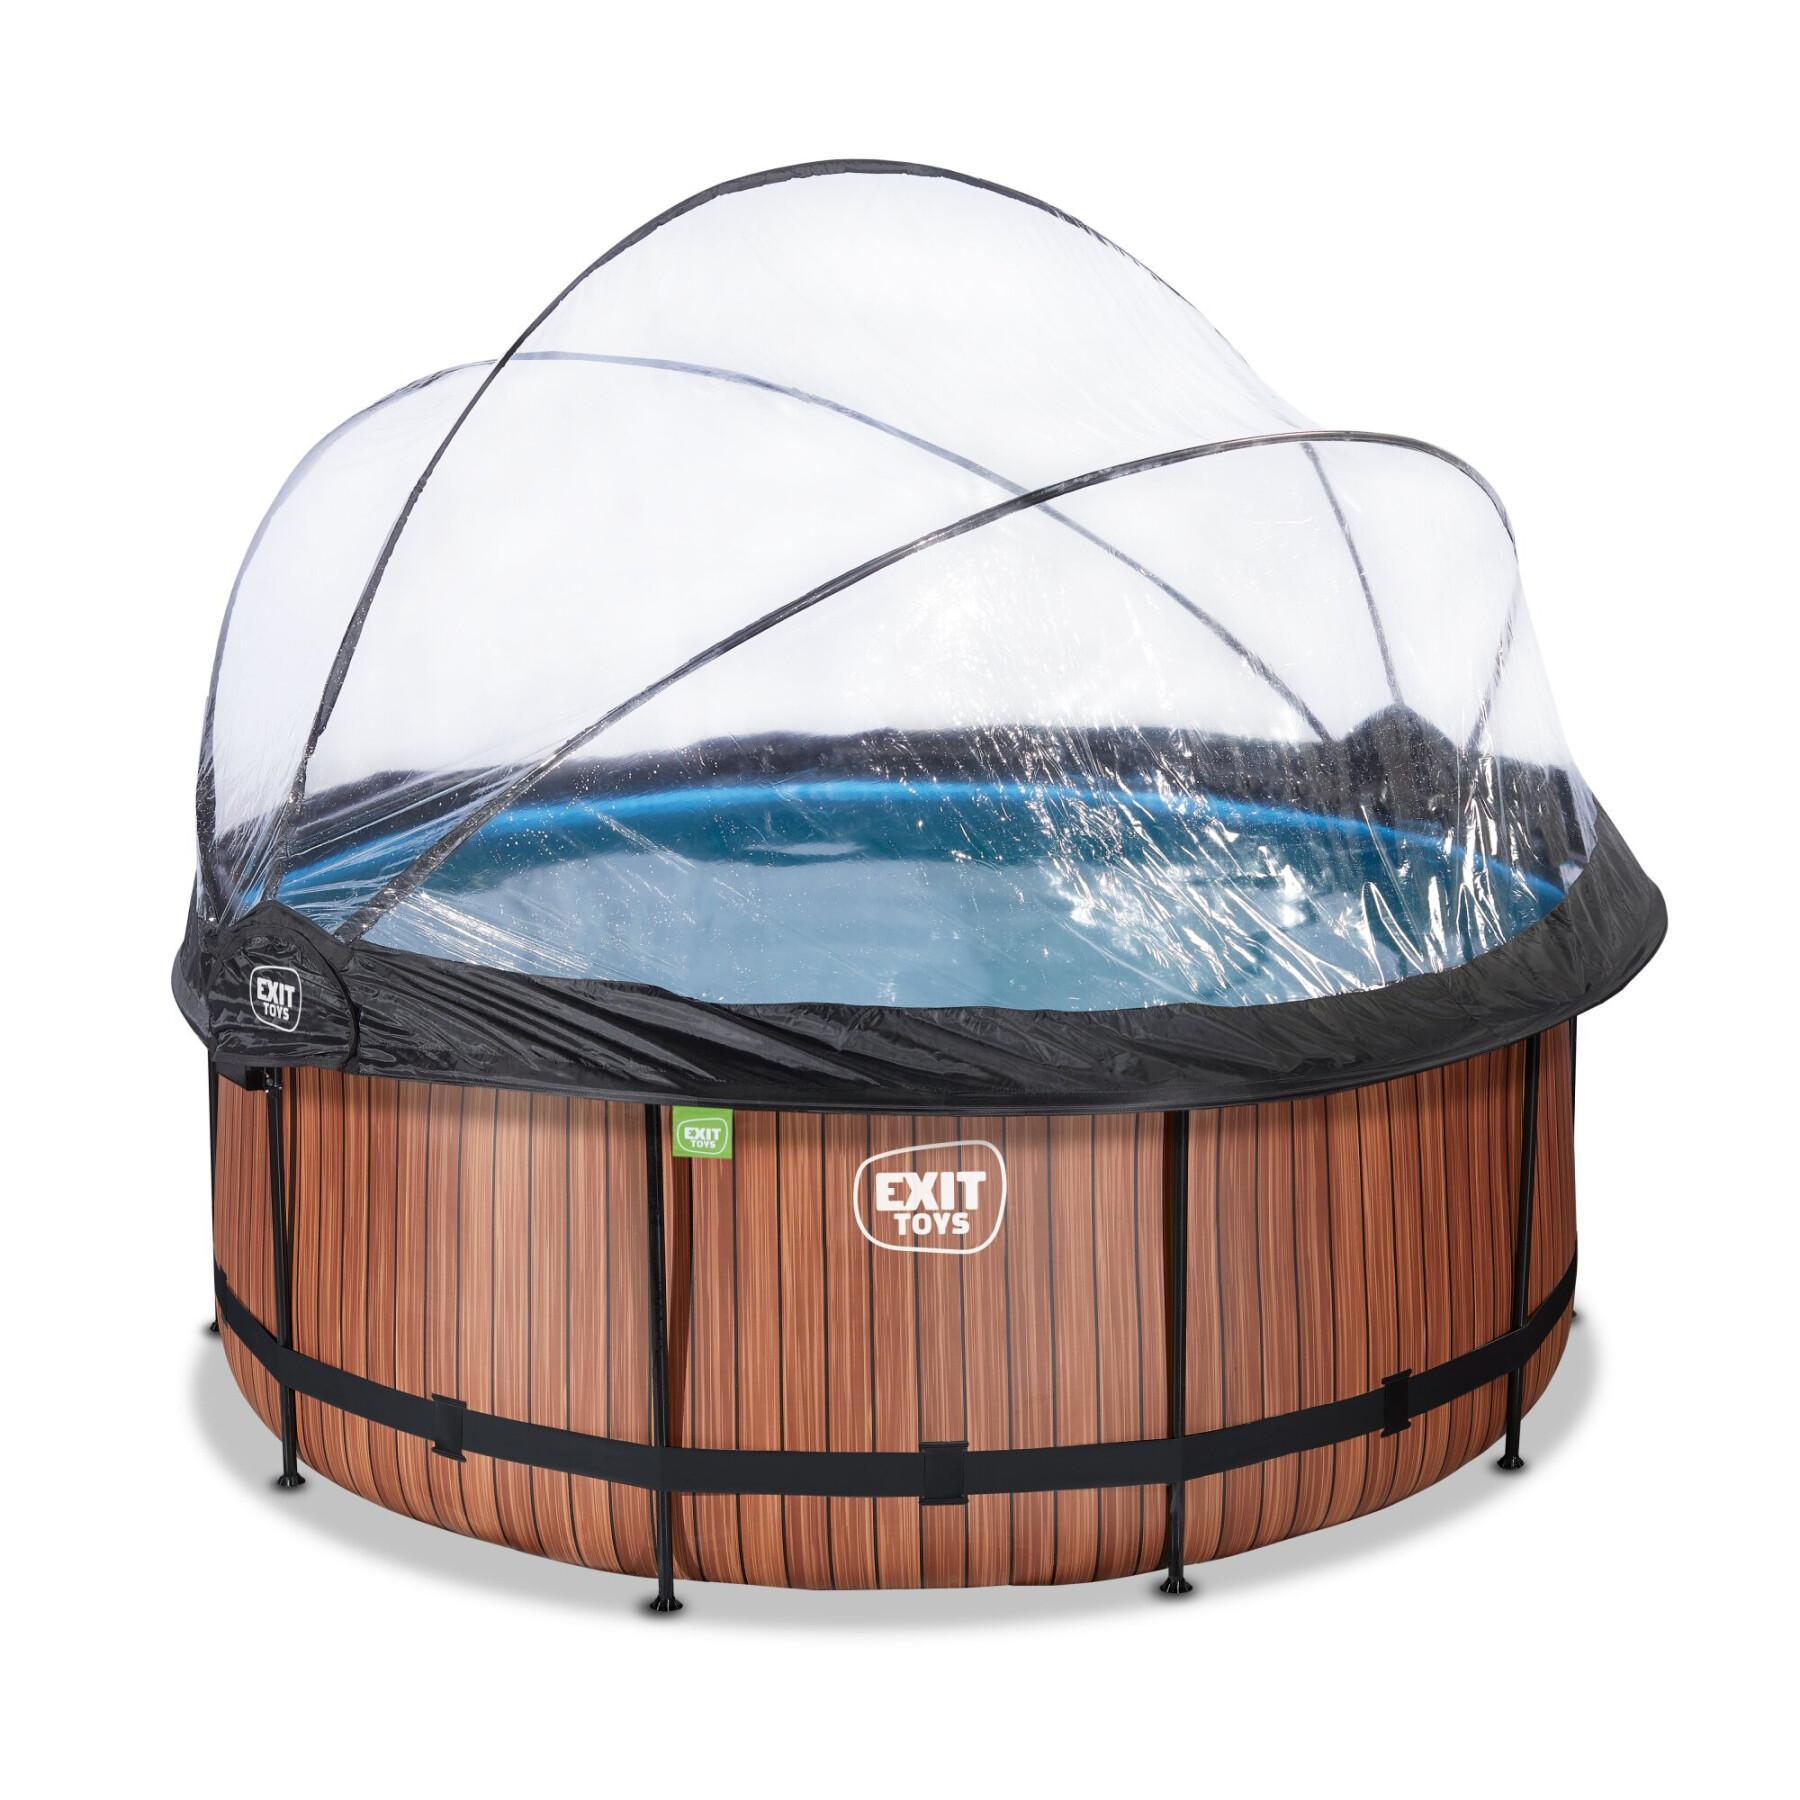 Pool with sand filter pump and children's dome Exit Toys Wood 360 x 122 cm